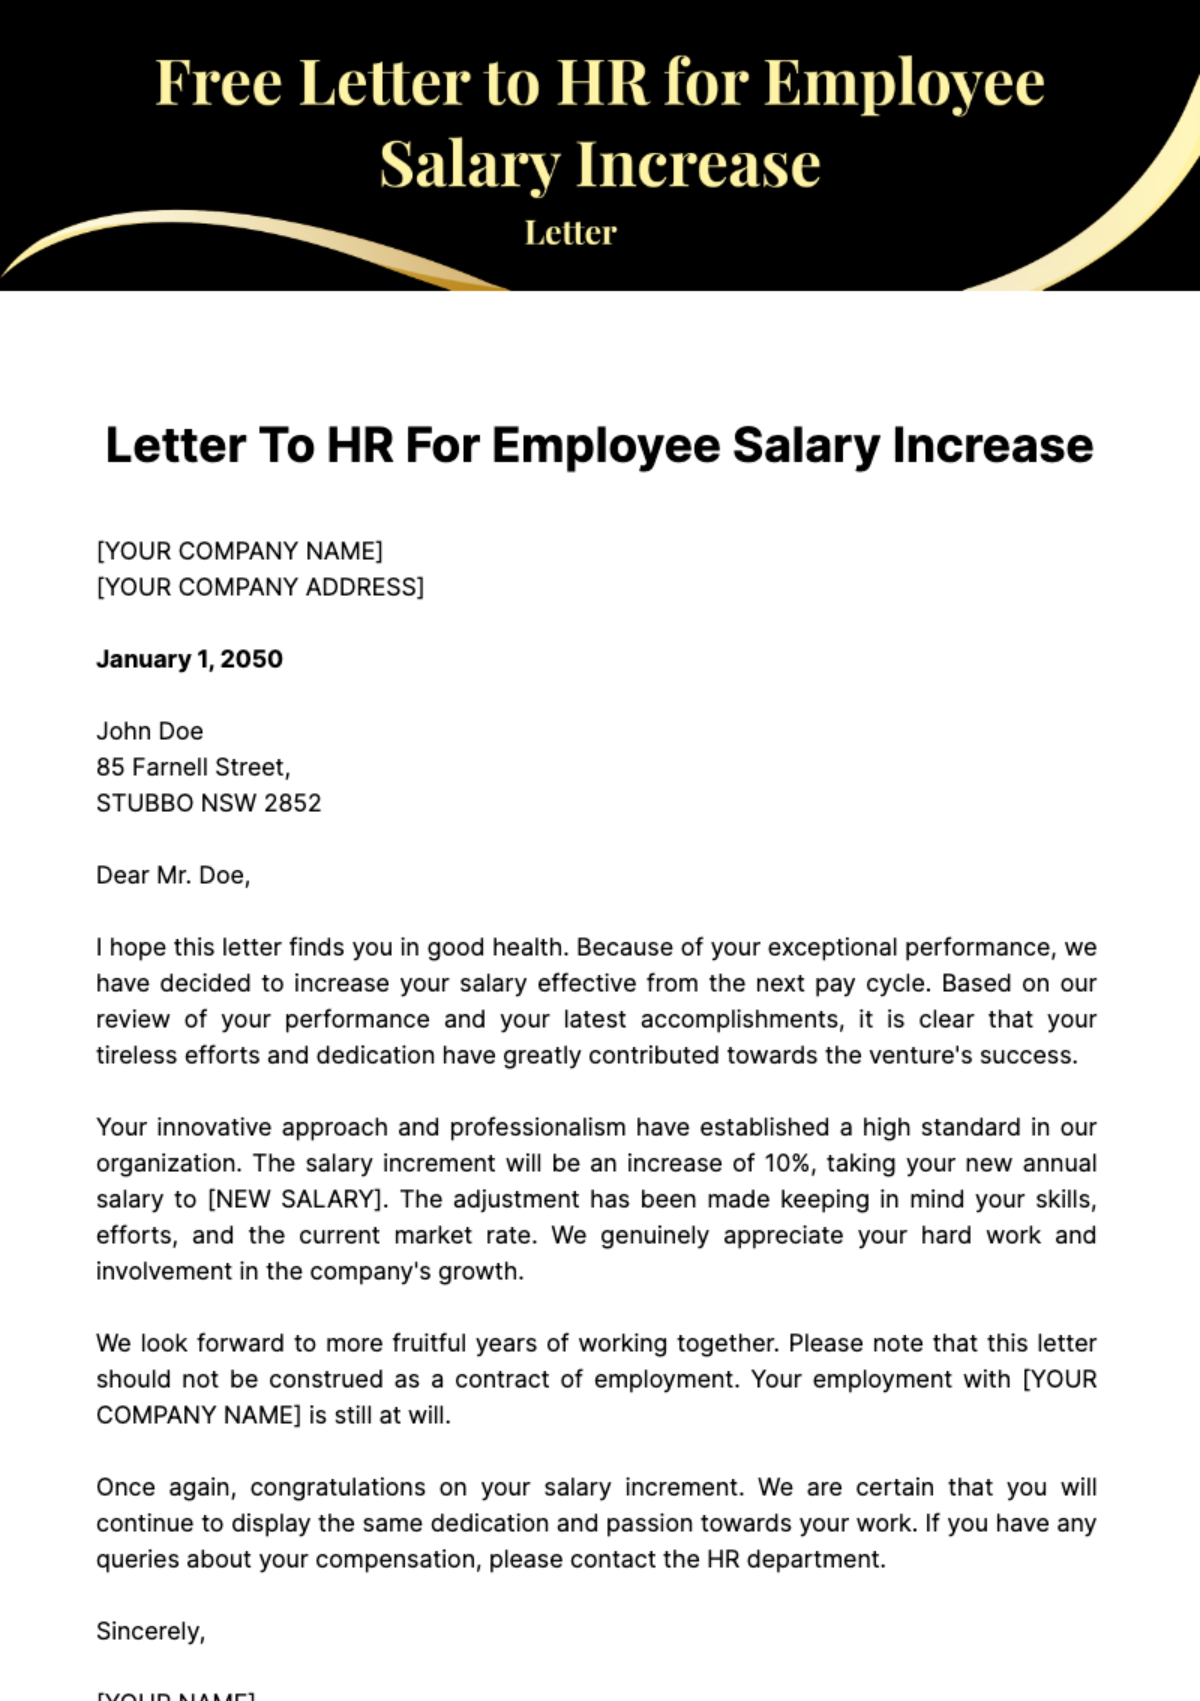 Free Letter to HR for Employee Salary Increase Template